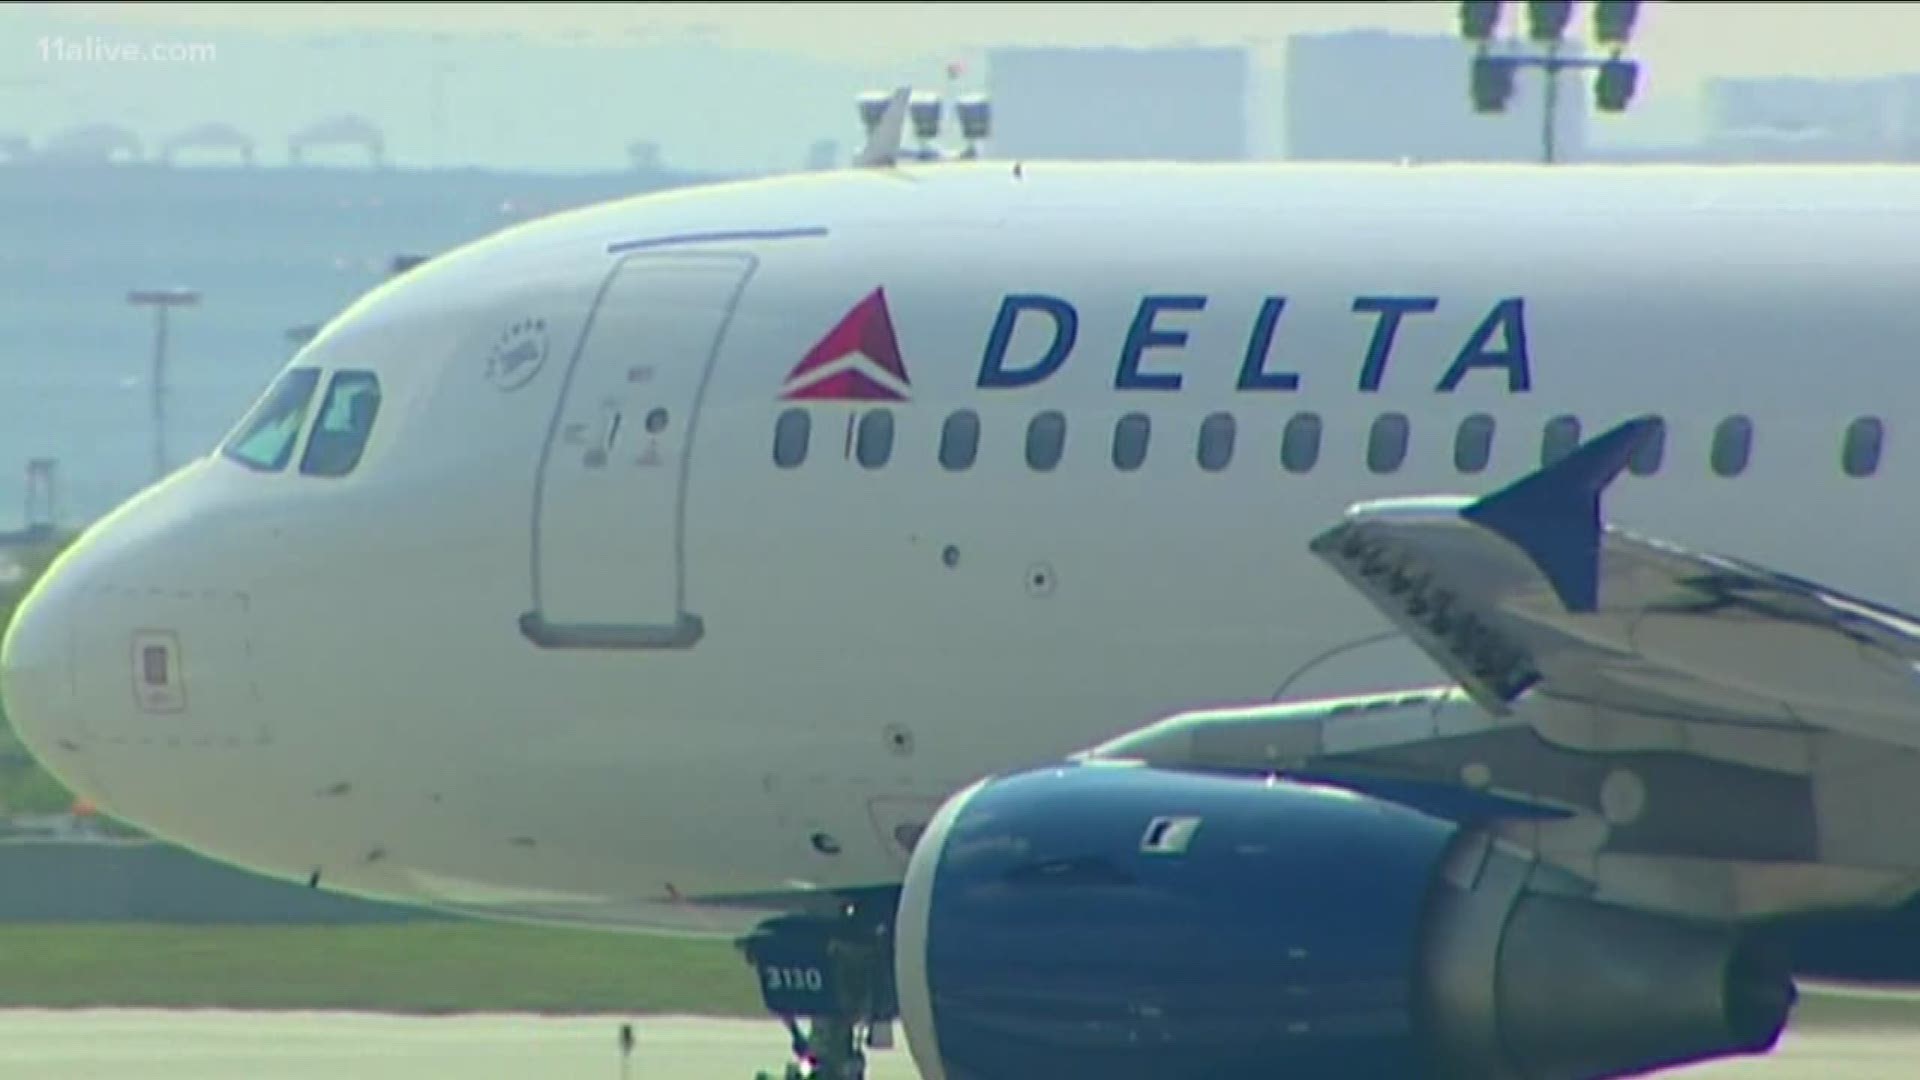 Delta announced the upgrades to its main cabin service for international flights on Tuesday.